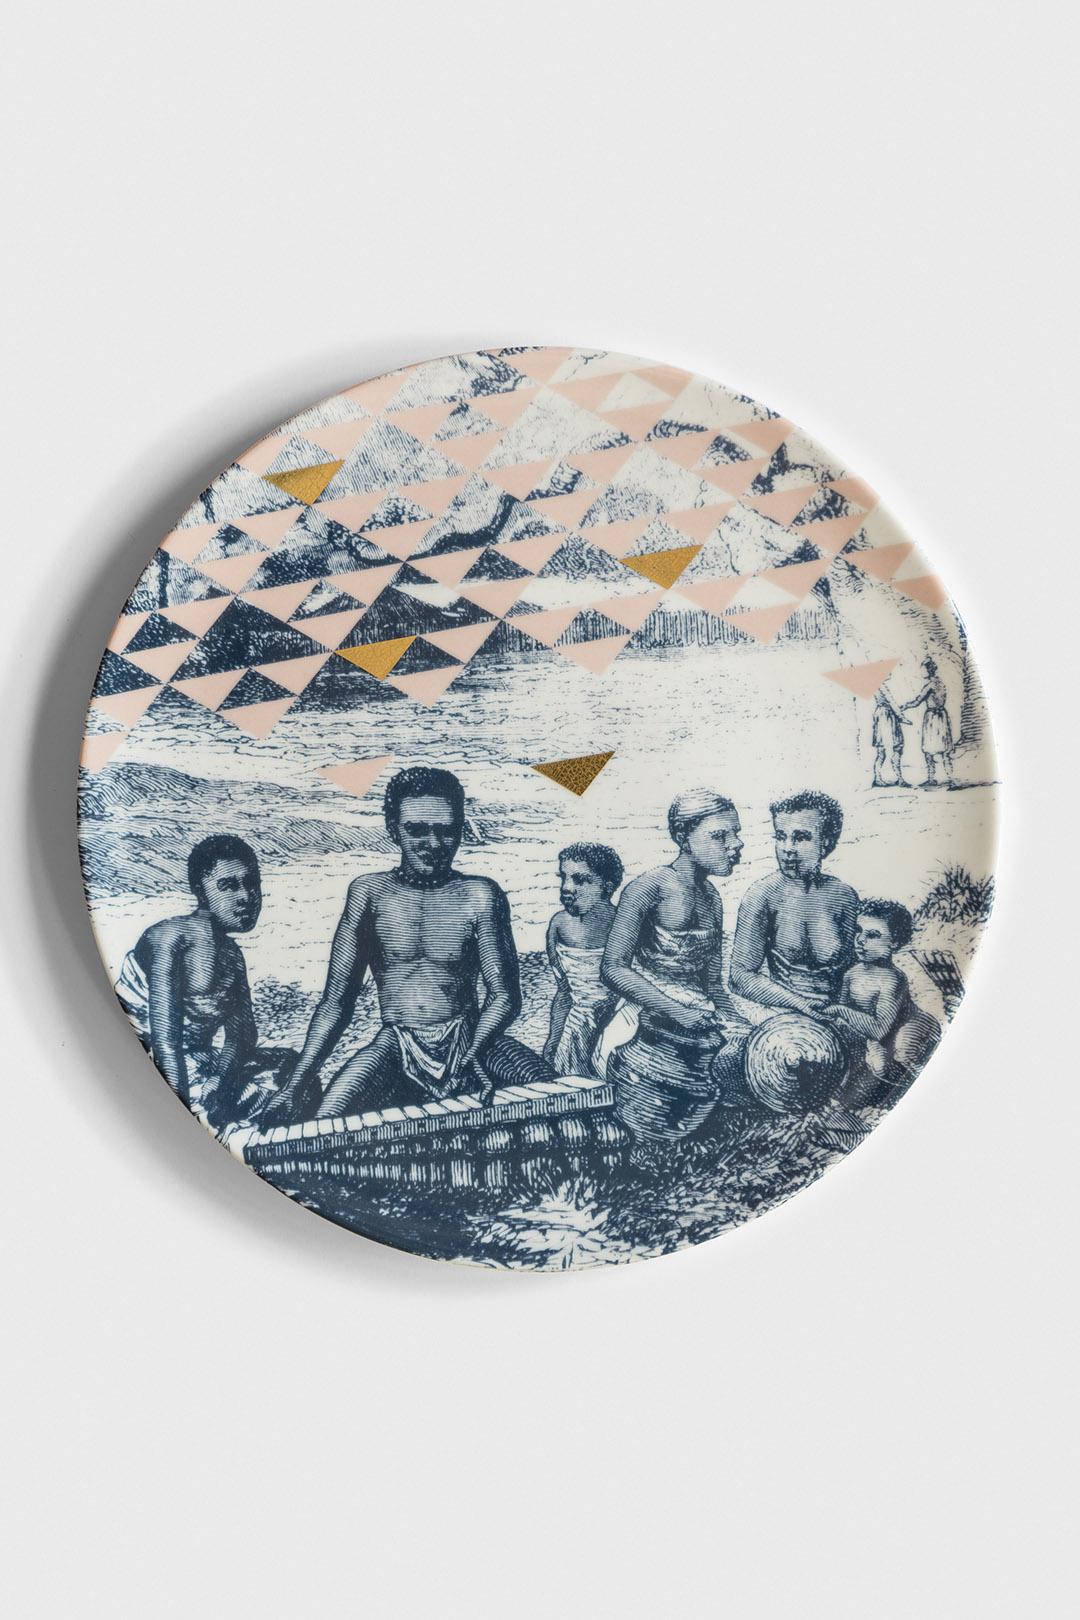 Handmade in Italy, designed by Vito Nesta.

This porcelain dinner plate representing a beautiful image from Kenya is available also in sets of 3 or 6 plates with different Kenya ambienced images (upon request).